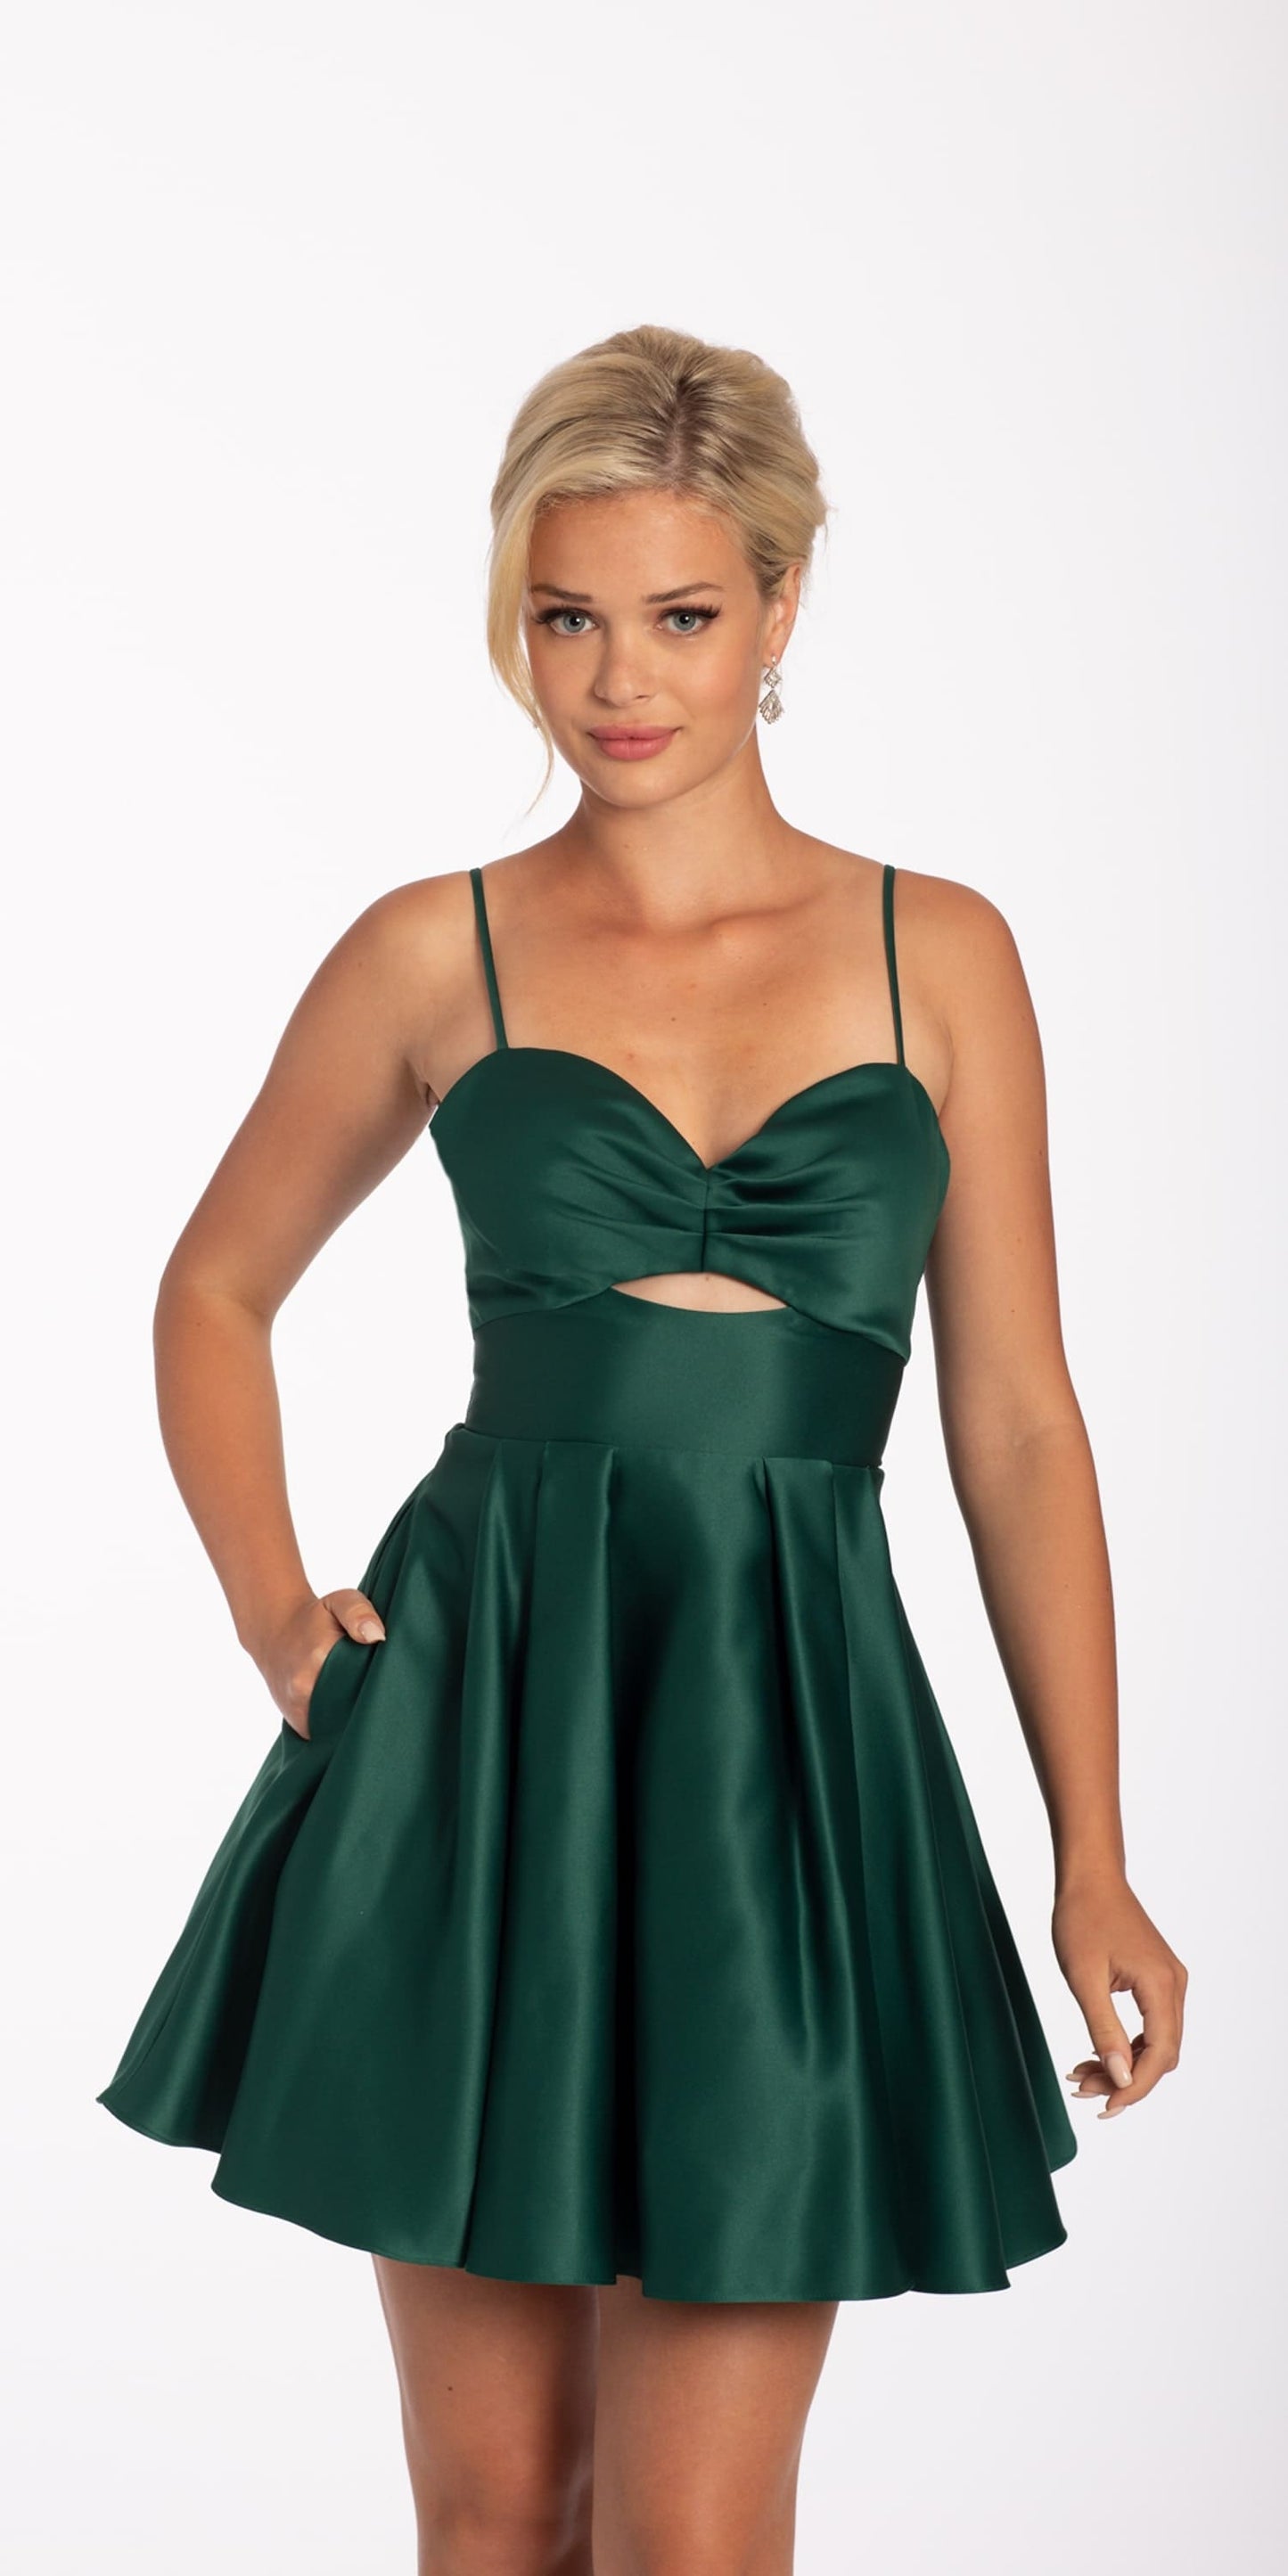 Camille La Vie Pleated Satin Fit and Flare Dress with Peek-a-Boo-Bodice missy / 2 / hunter-green